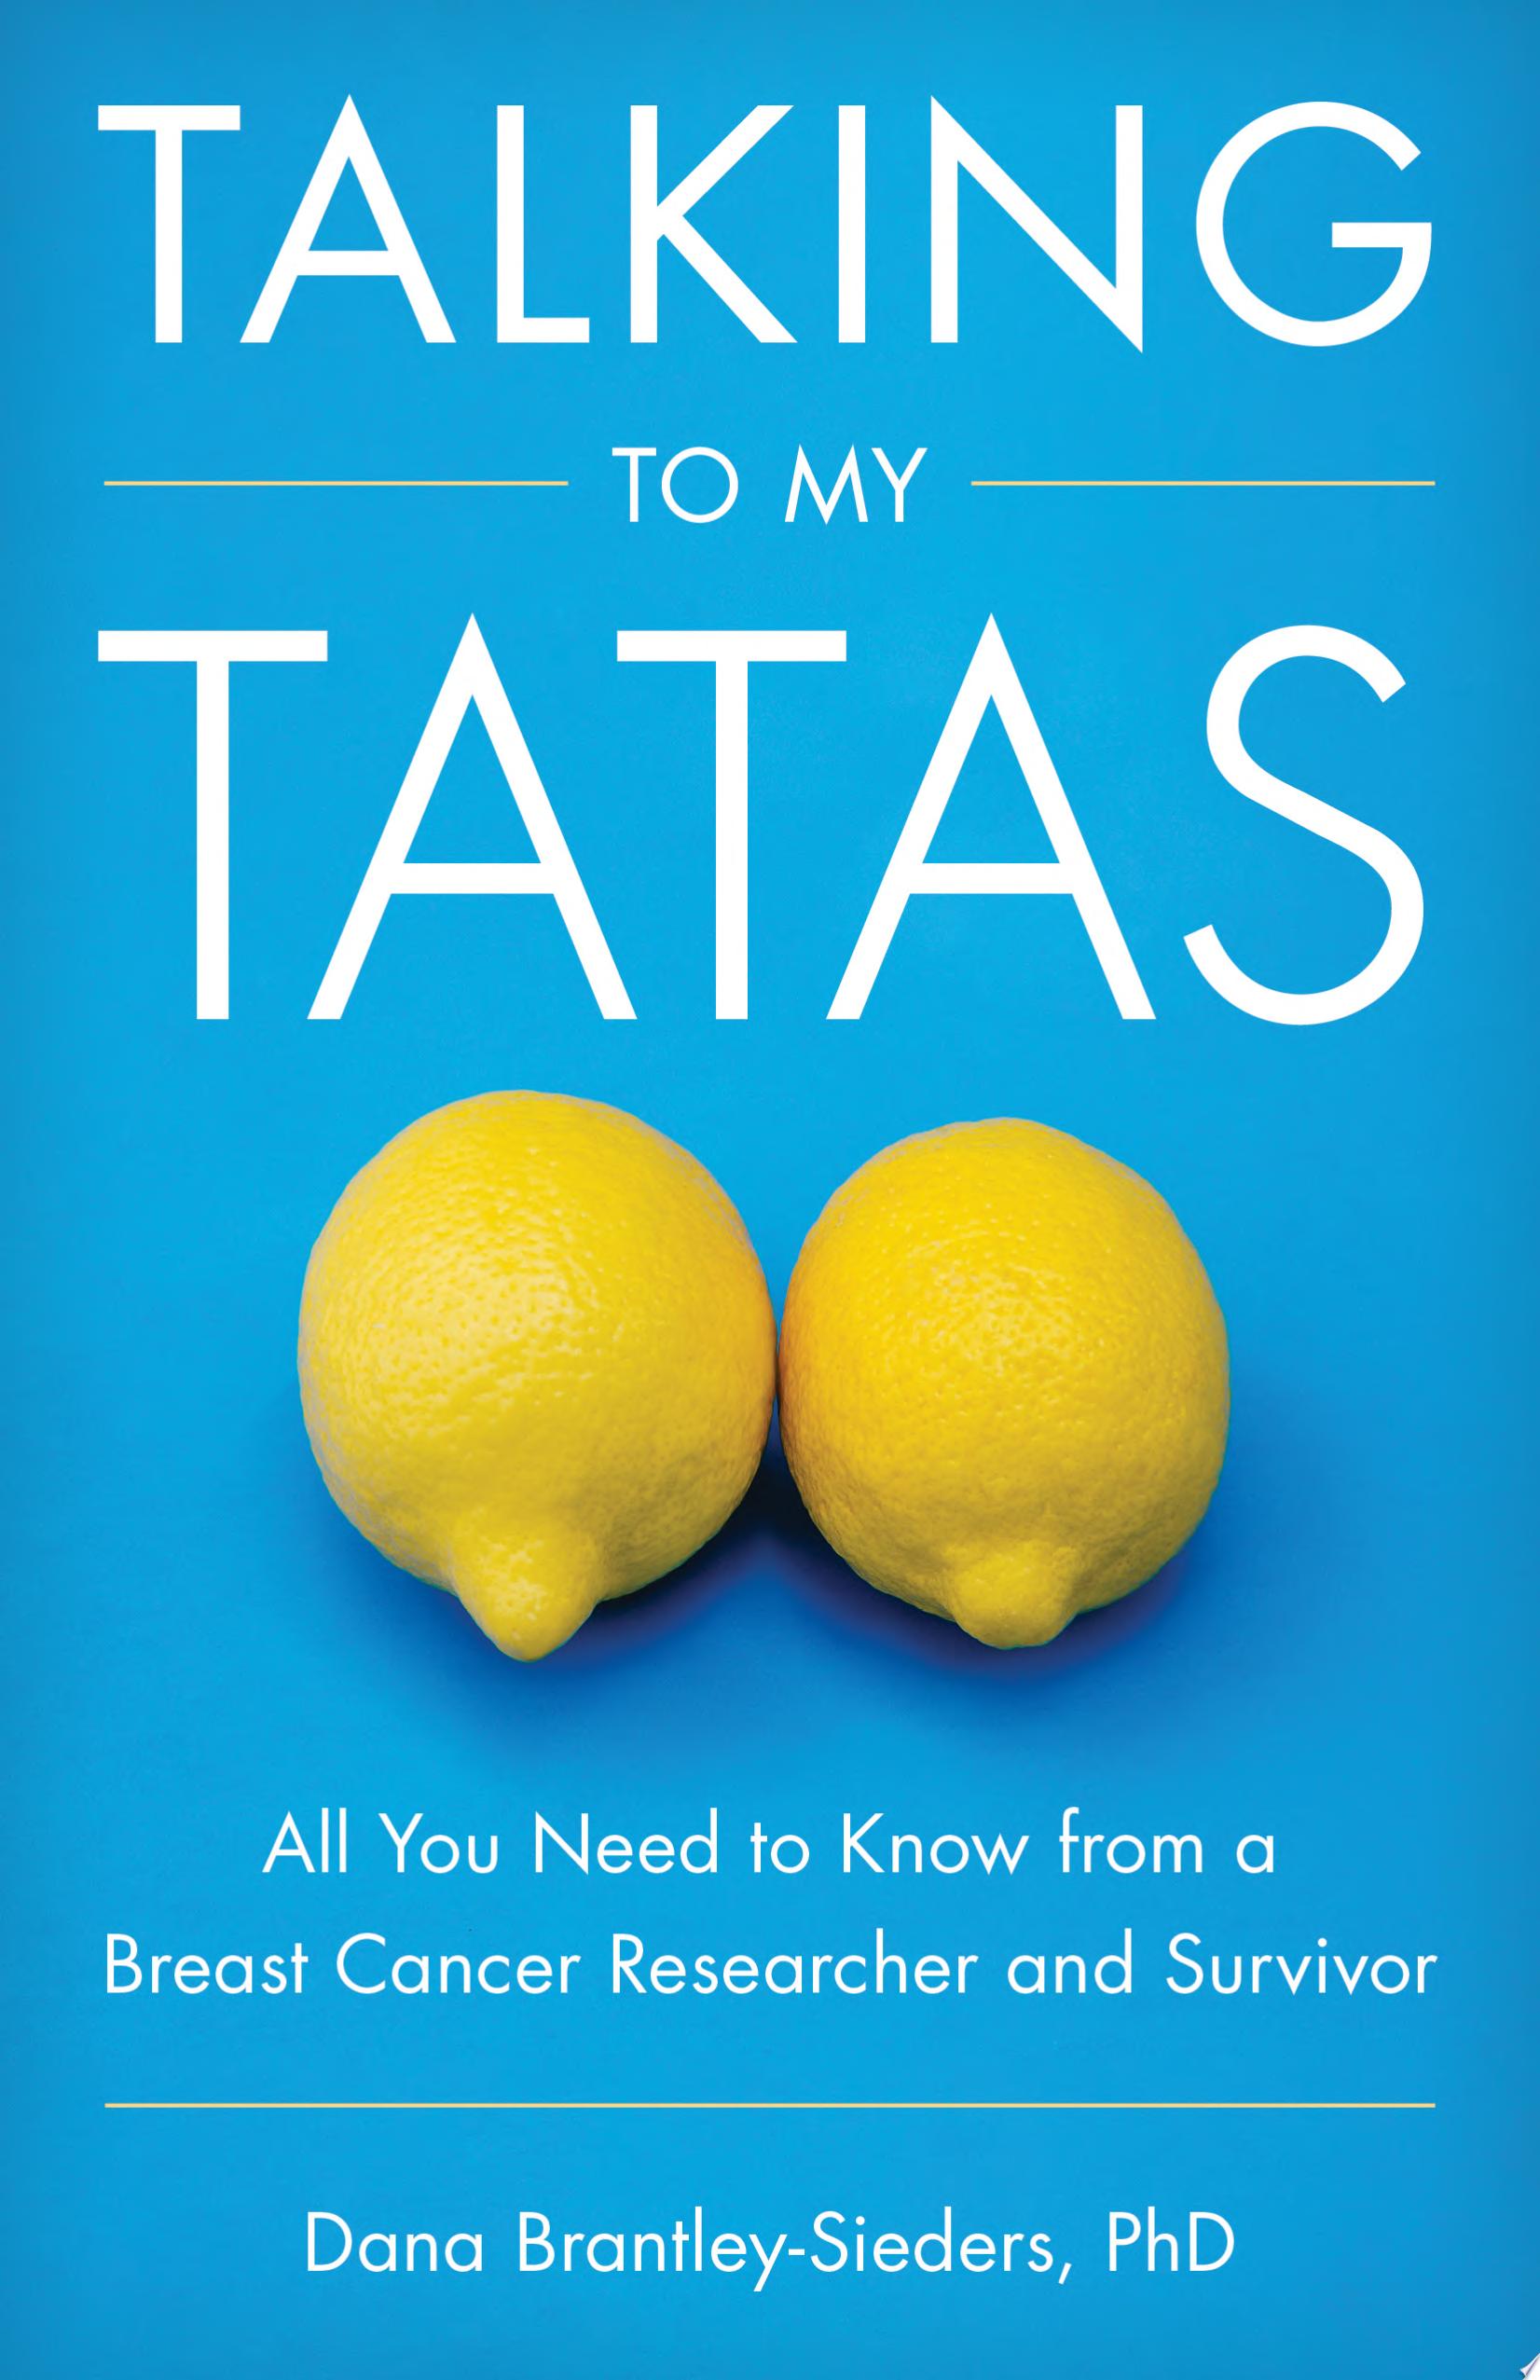 Image for "Talking to My Tatas"